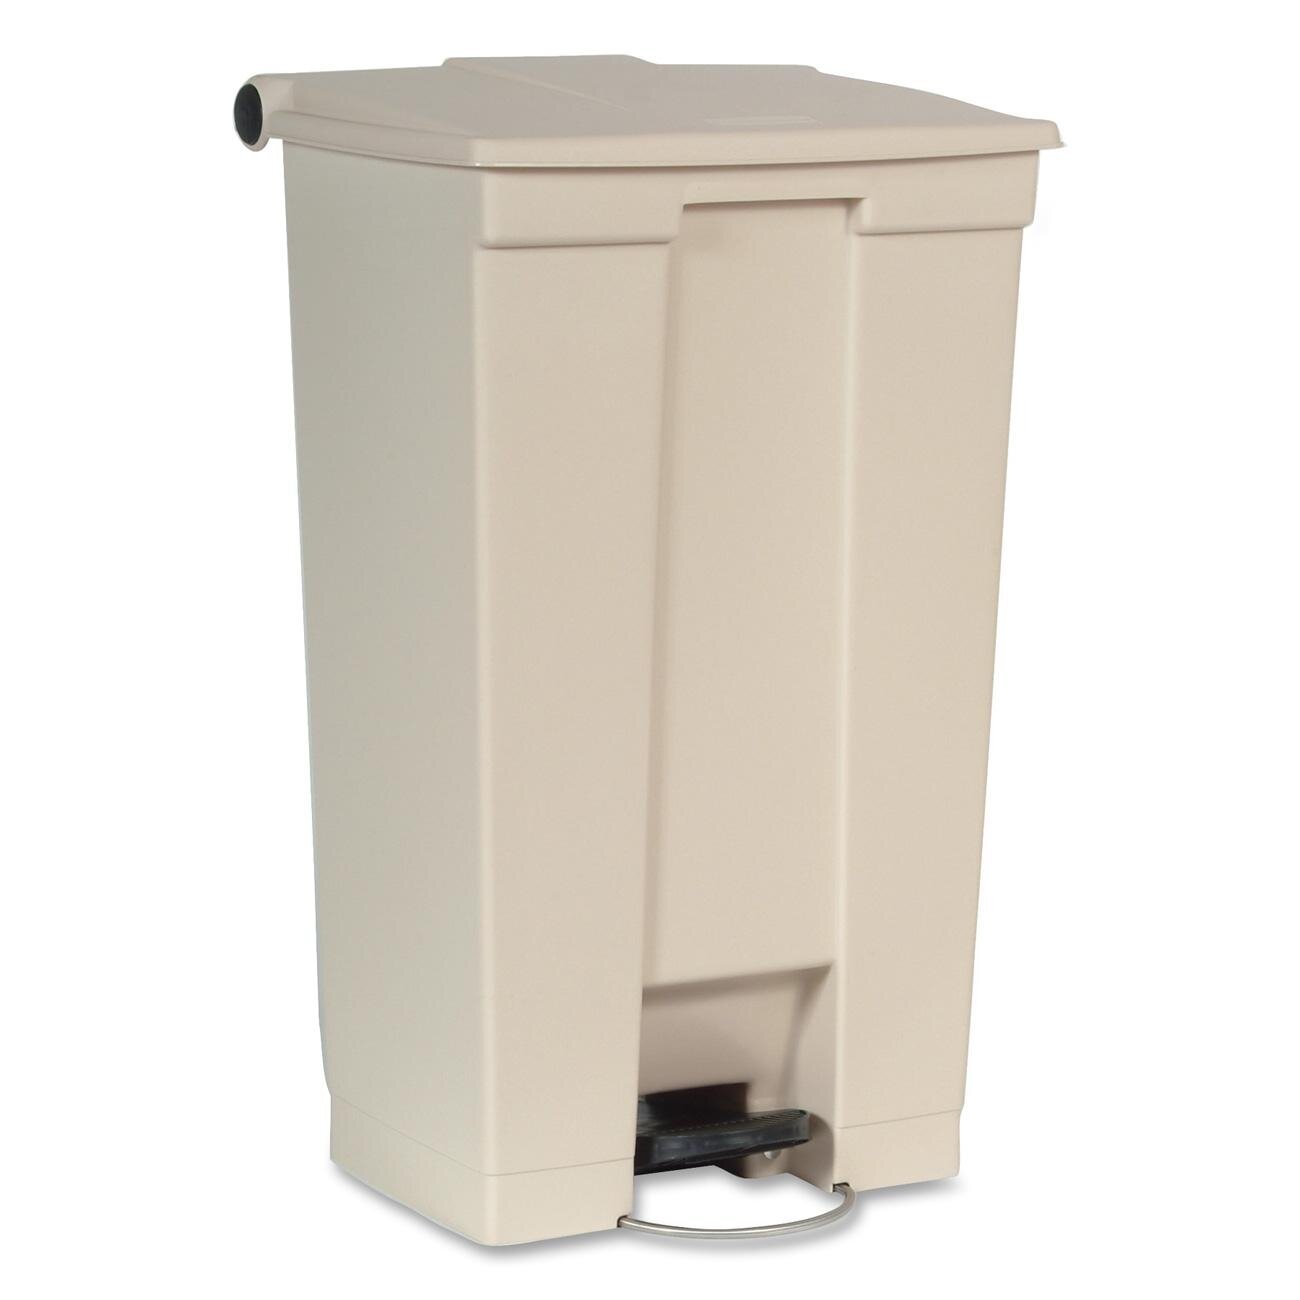 Rubbermaid Wall Mount Trash Can with Swing Lid Beige